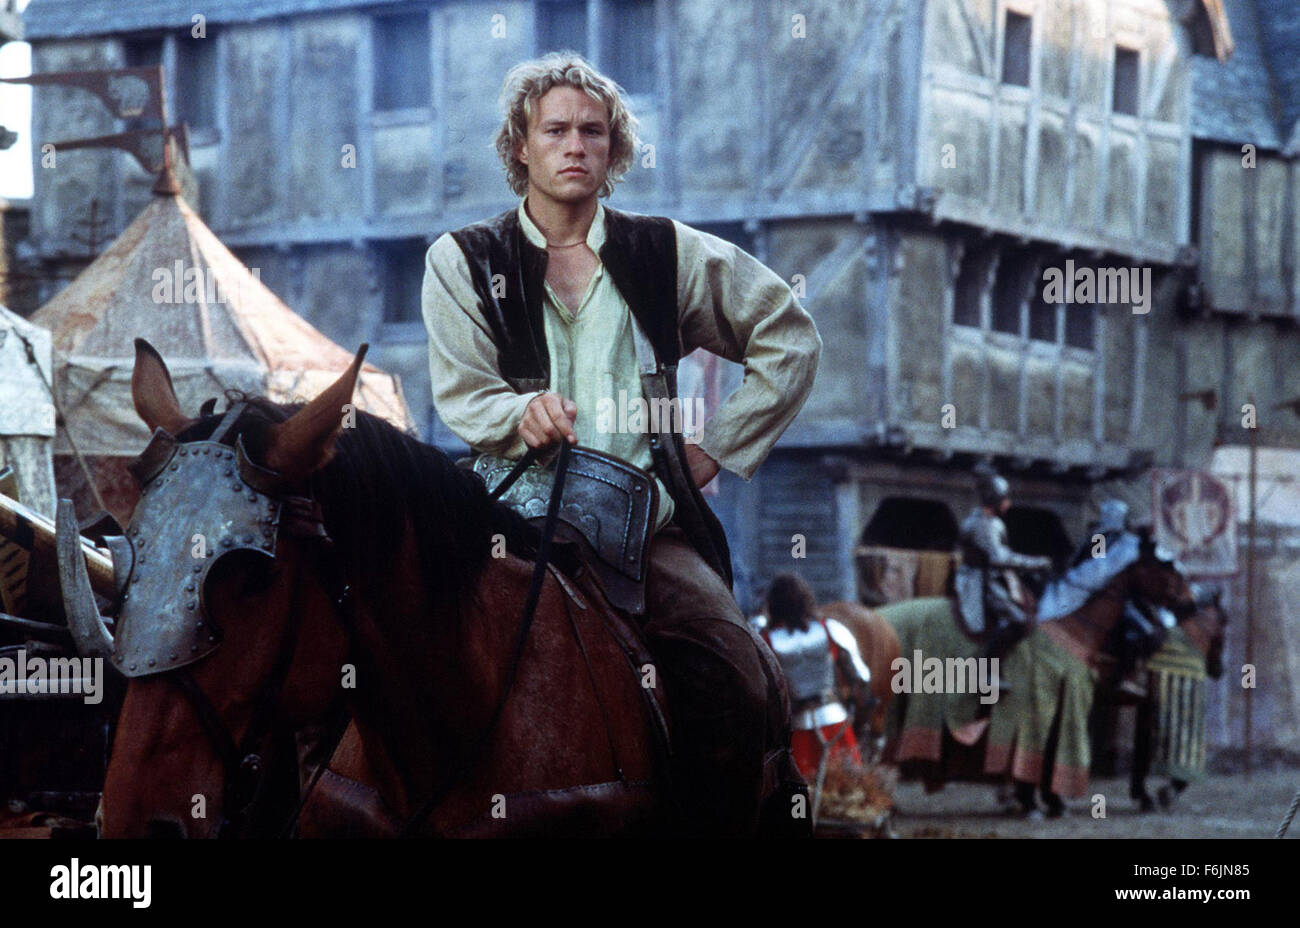 RELEASED Oct 11, 2001 - A KNIGHT'S TALE - From peasant to knight - one man can change his stars. Directed by Brian Helgeland. Shot in Prague, Czech Republic.   Actor HEATH LEDGER as Sir William Thatcher / Sir Ulrich von Lichtenstein of Gelderland in 'A Knight's Tale'. Stock Photo